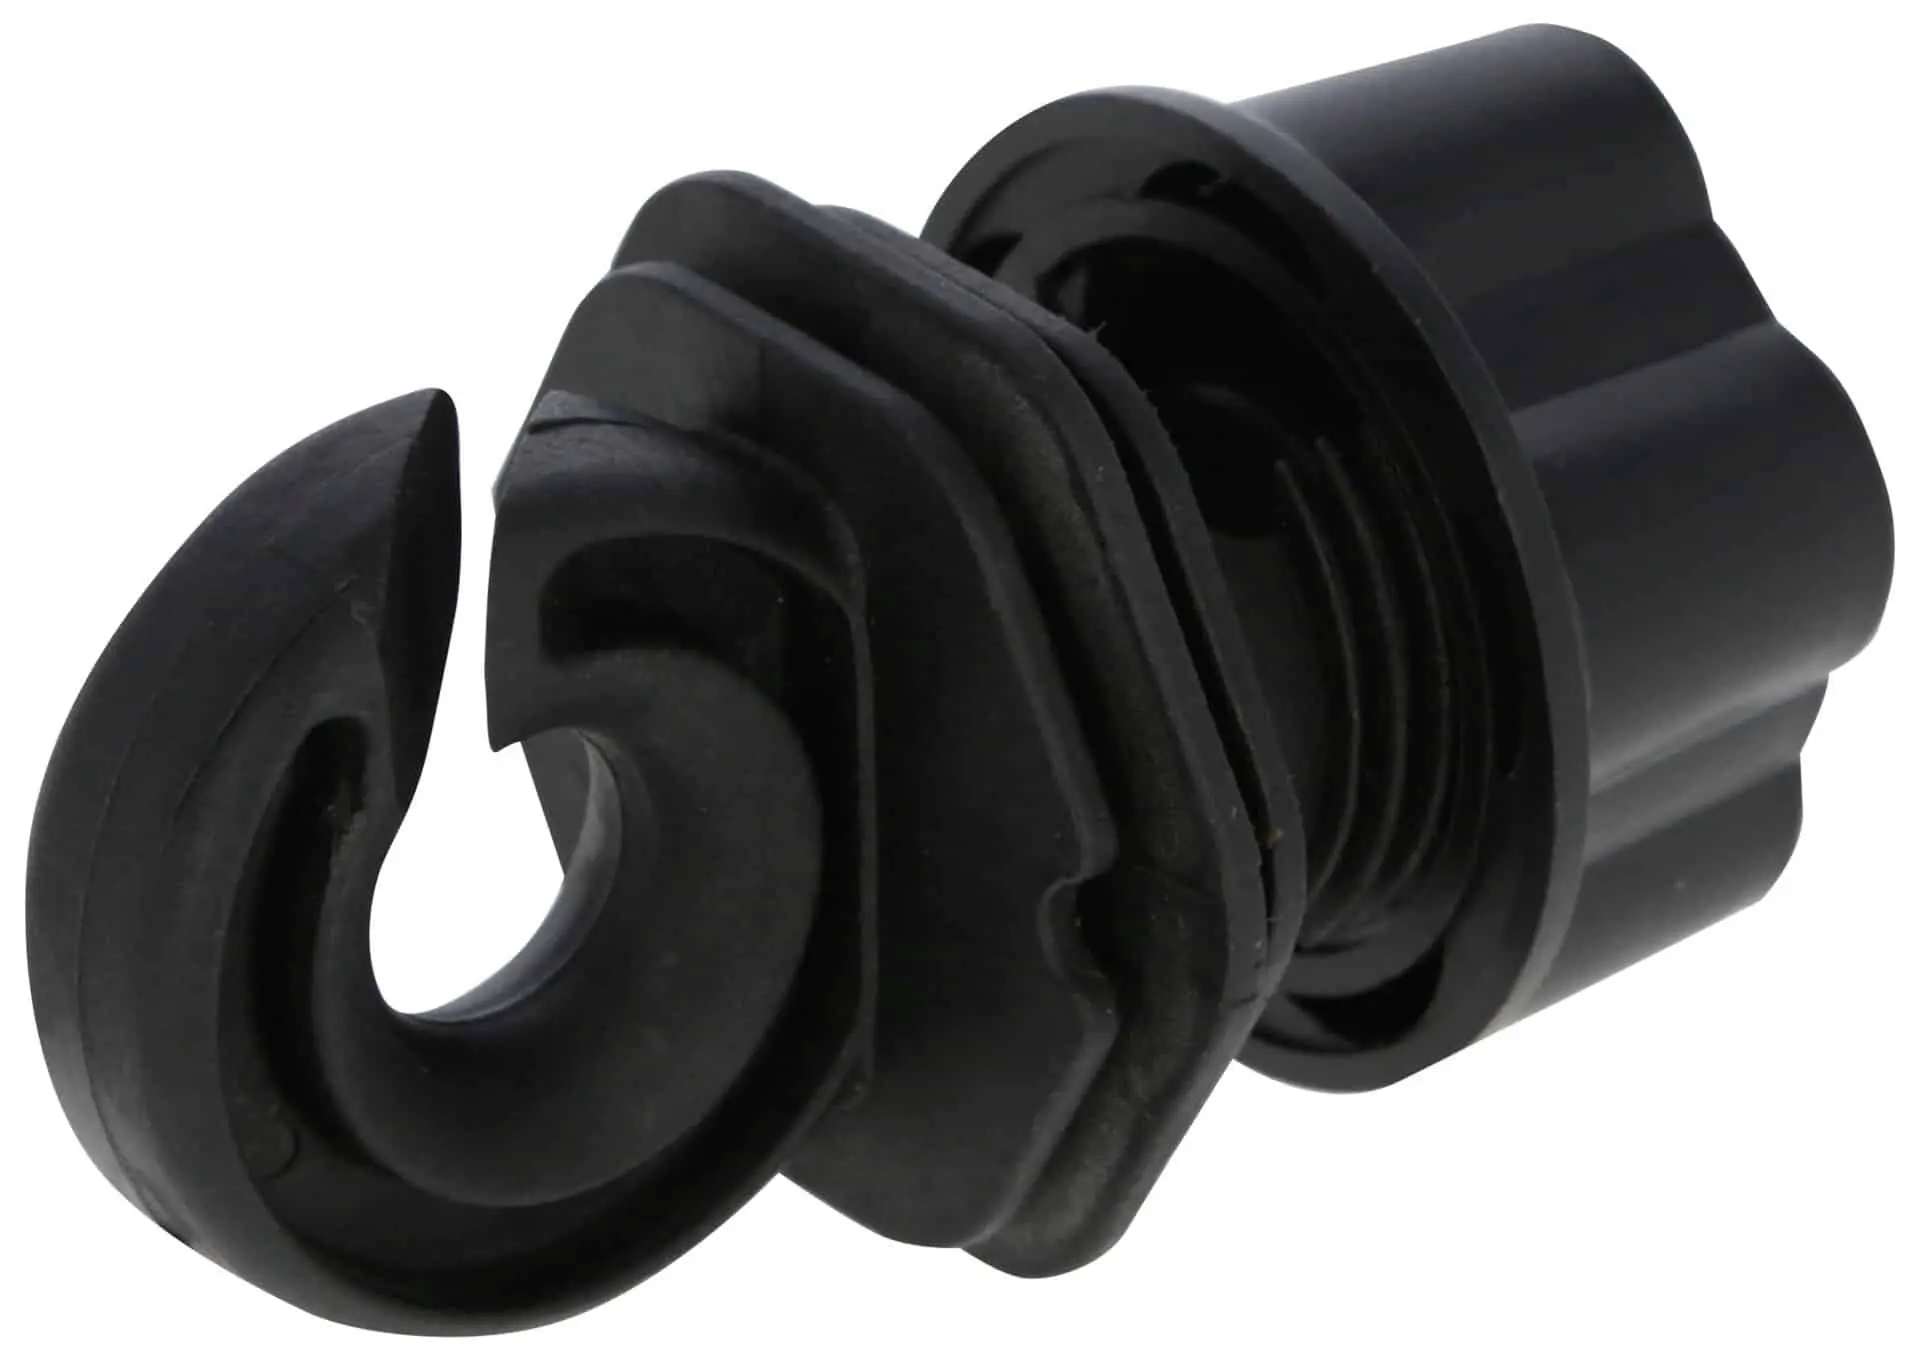 VARIO Ring Insulator 14pcs in Blister for Posts from 7-19mm